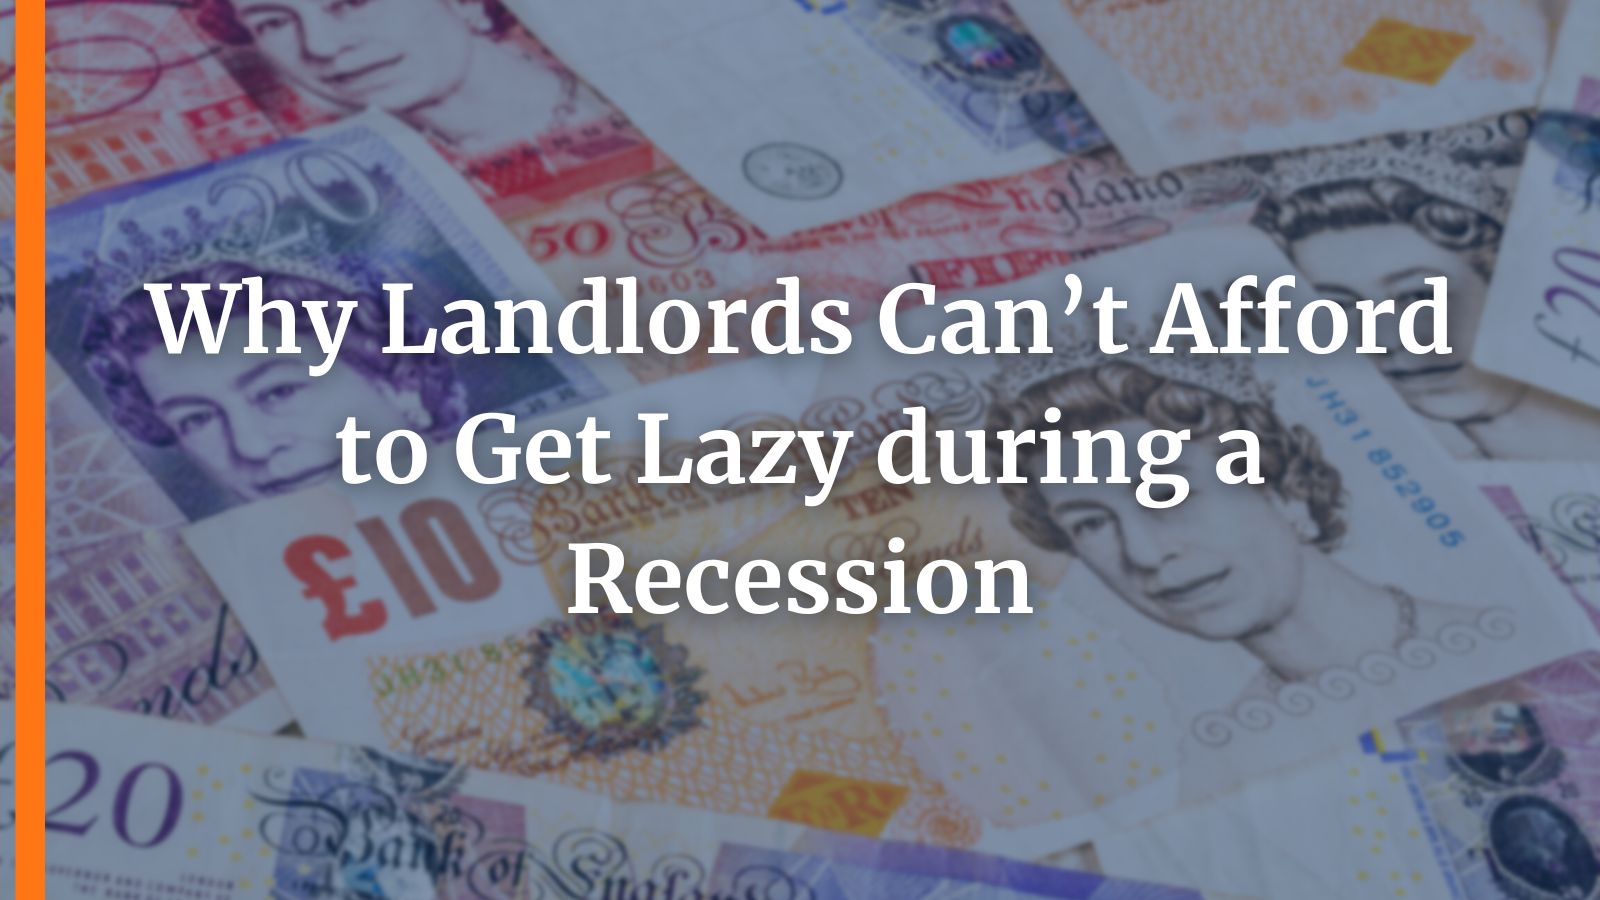 Why Landlords Can’t Afford to Get Lazy during a Recession